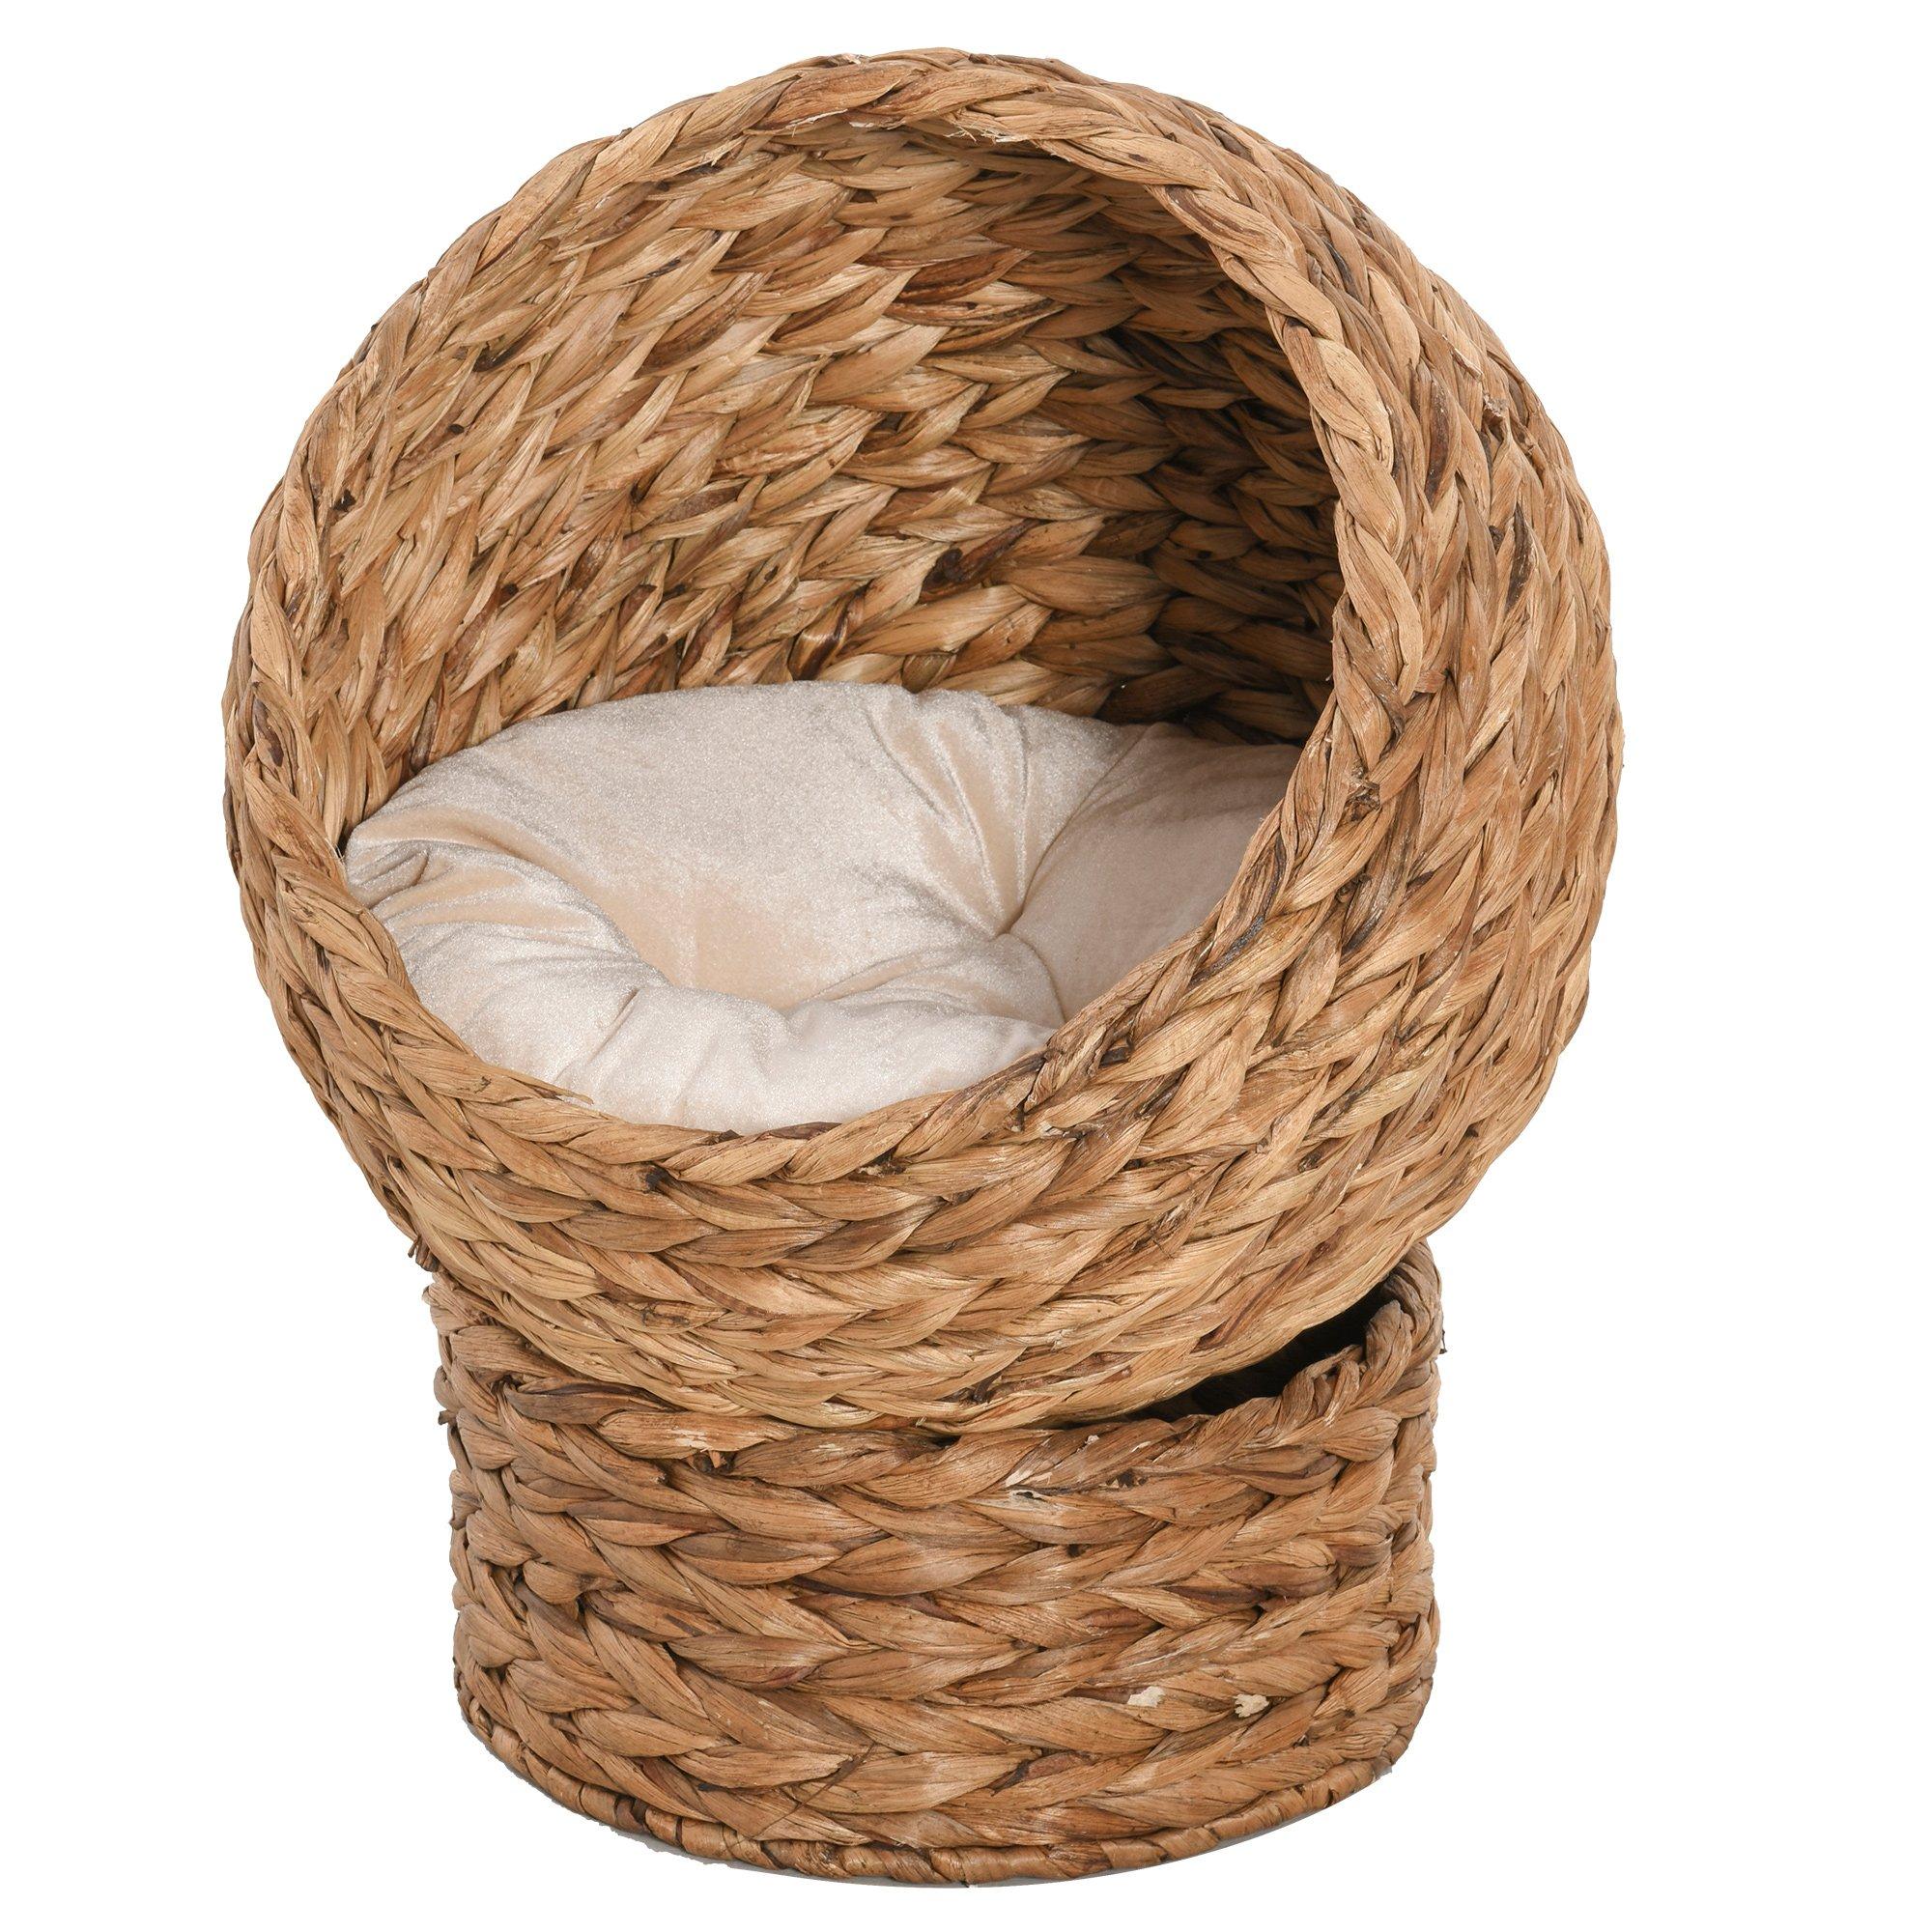 Wicker Cat House, Raised Cat Bed with Cylindrical Base, 50 x 42 x 60